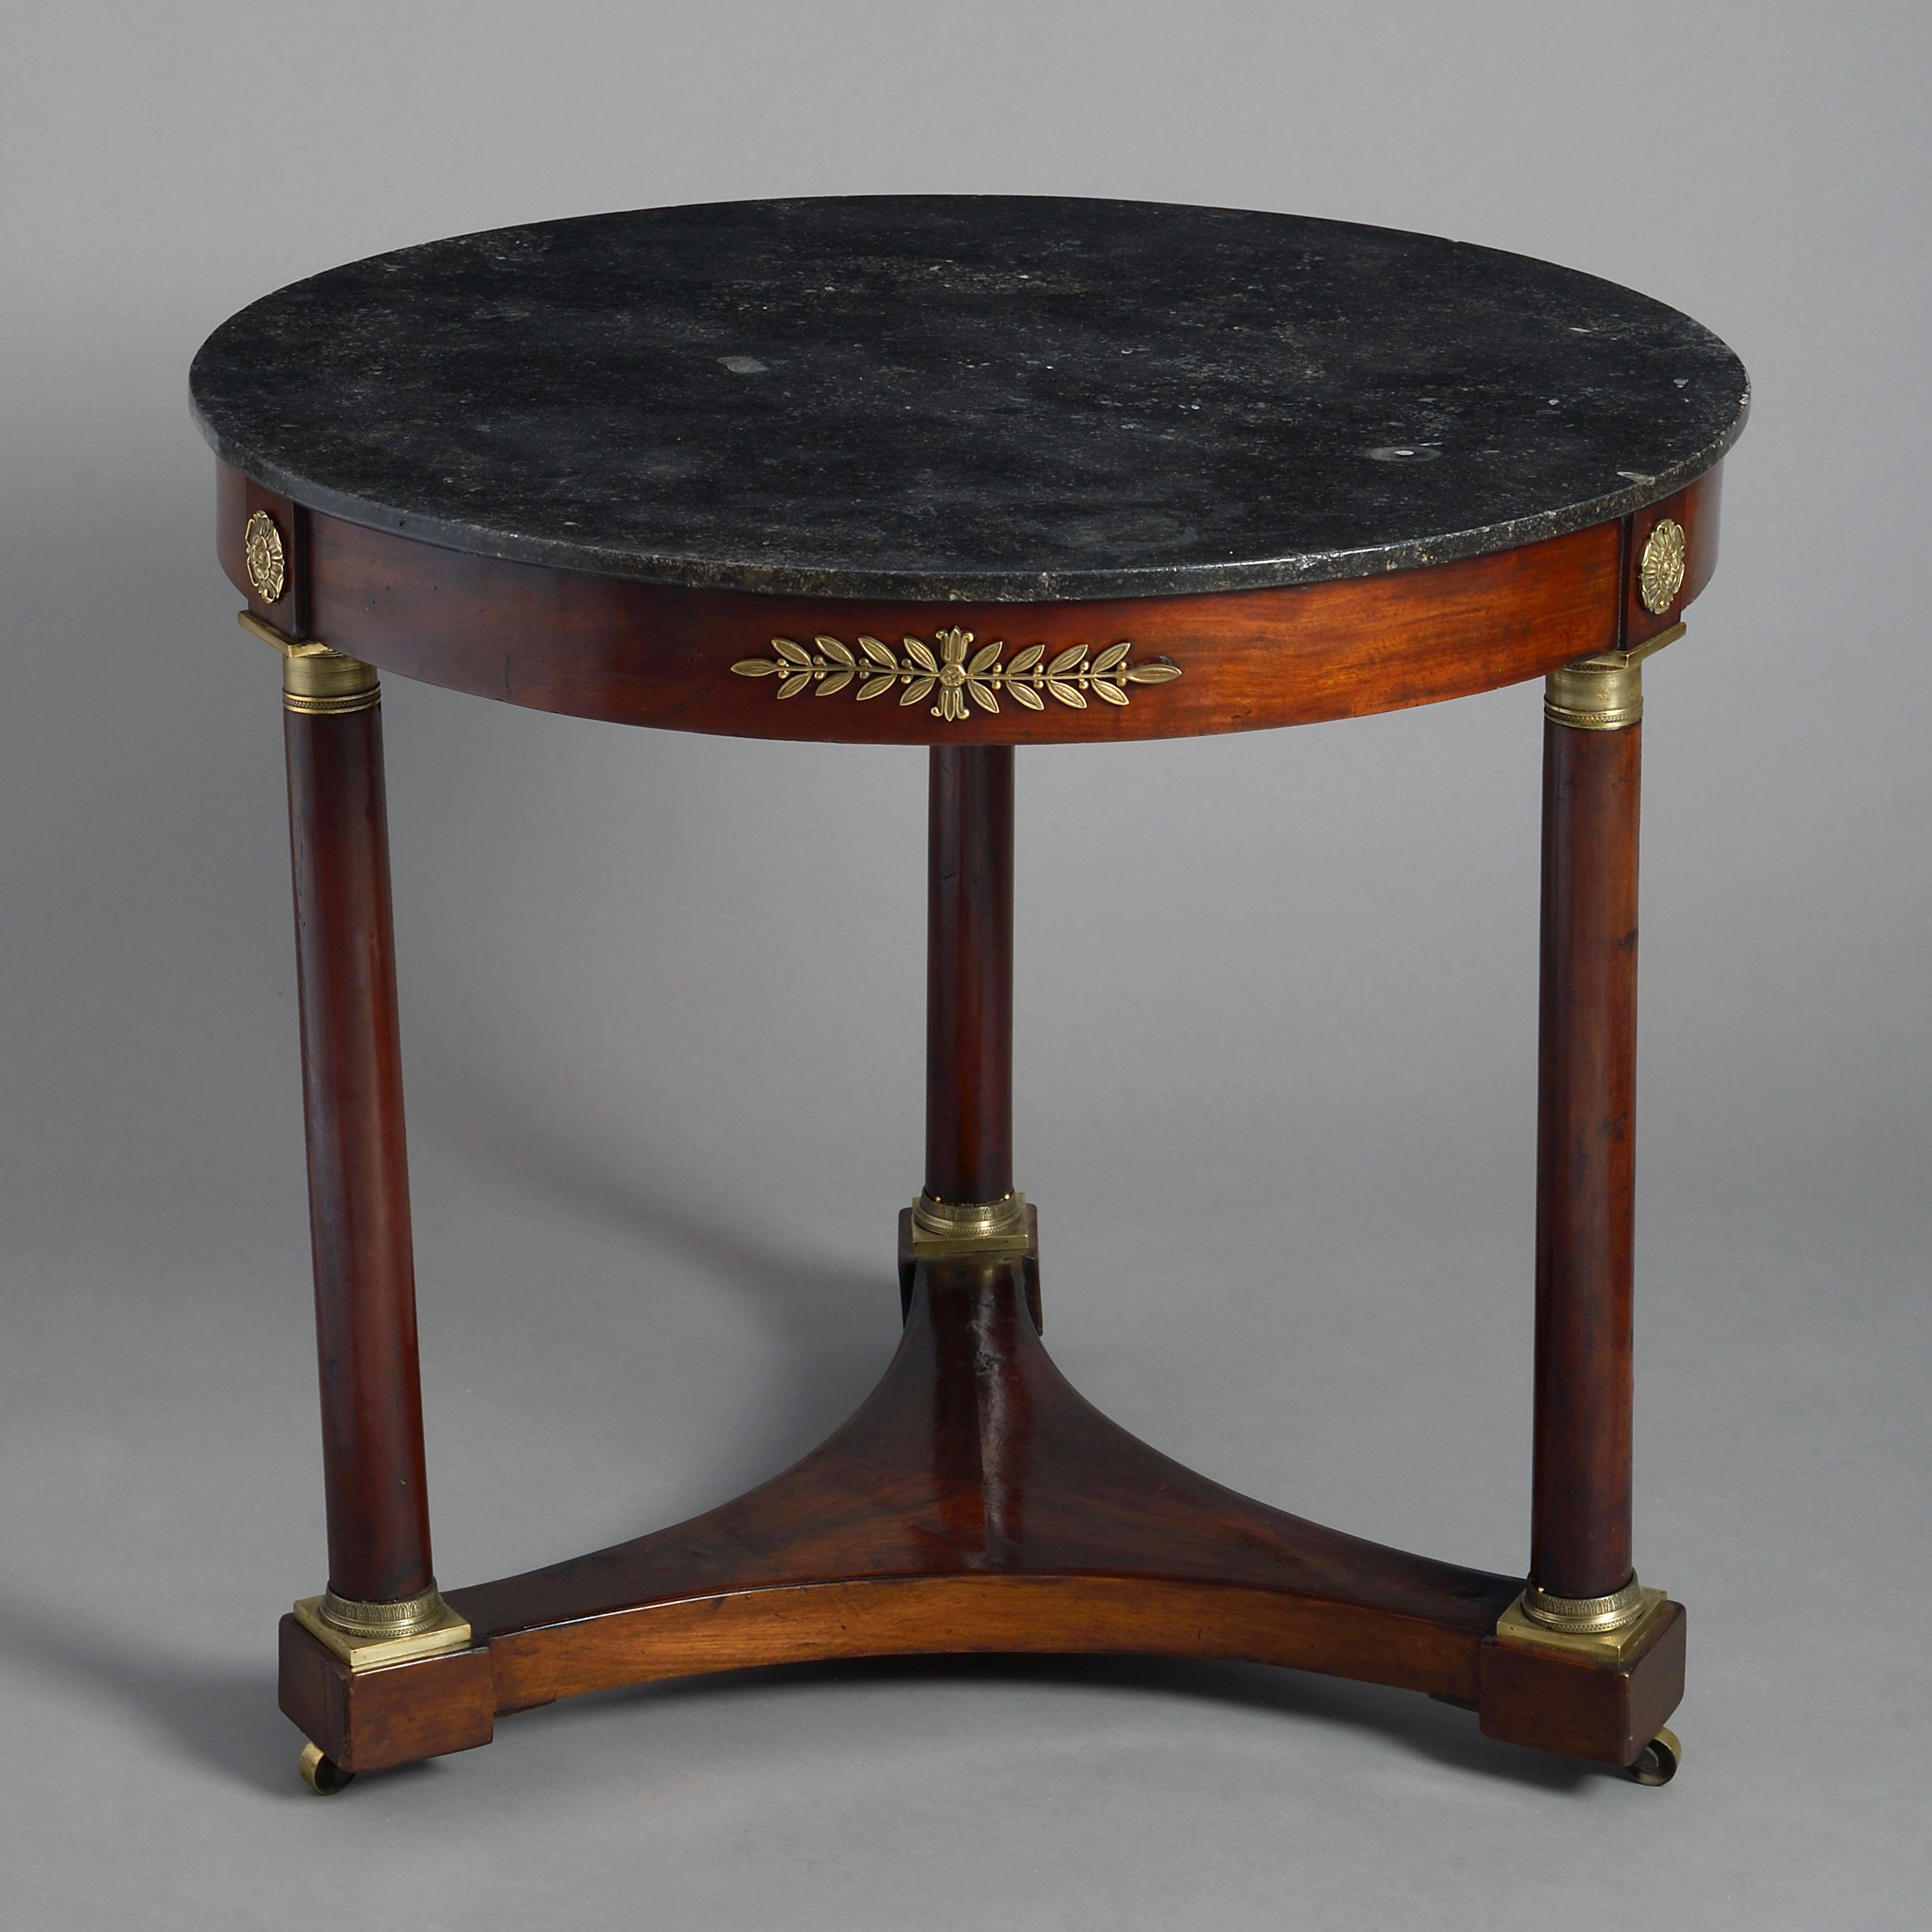 An early 19th century Empire period mahogany centre table, the grey marble fossil top set upon a frieze with brass mounts in the classical taste and supported by three columns with fine engine turned capitals and socles, all set upon a concave base